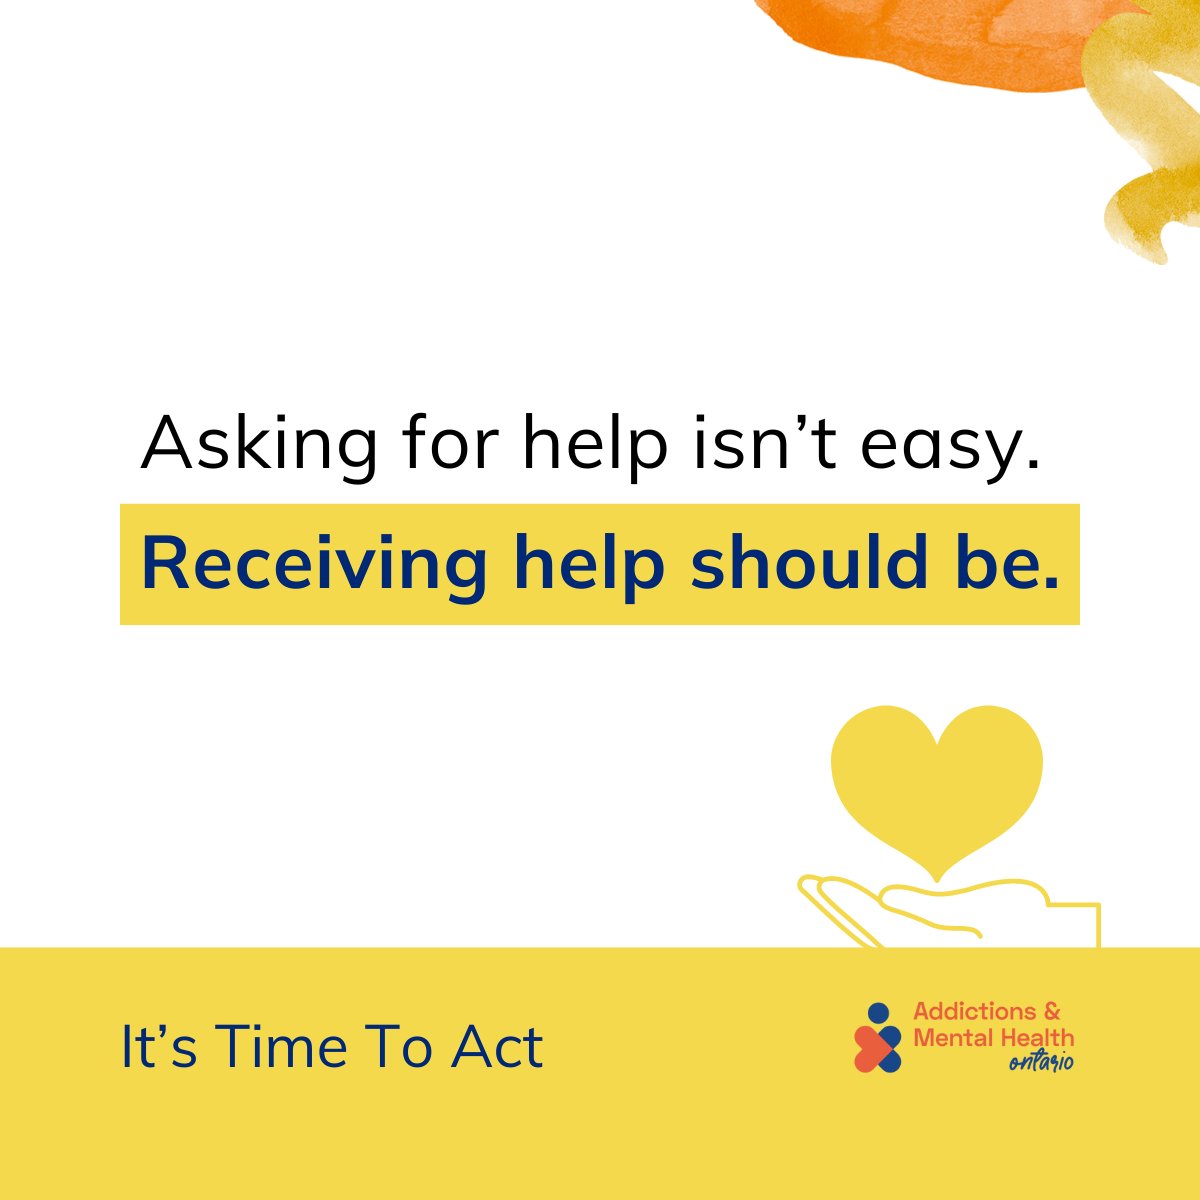 Stride is echoing @AMHOnt’s call for greater investment in the community mental health and addictions sector. This includes targeted support for: ✅Health Human Resources ✅Operating Budgets ✅Supportive Housing Learn more: tinyurl.com/AMHOBudget #ItsTimeToAct